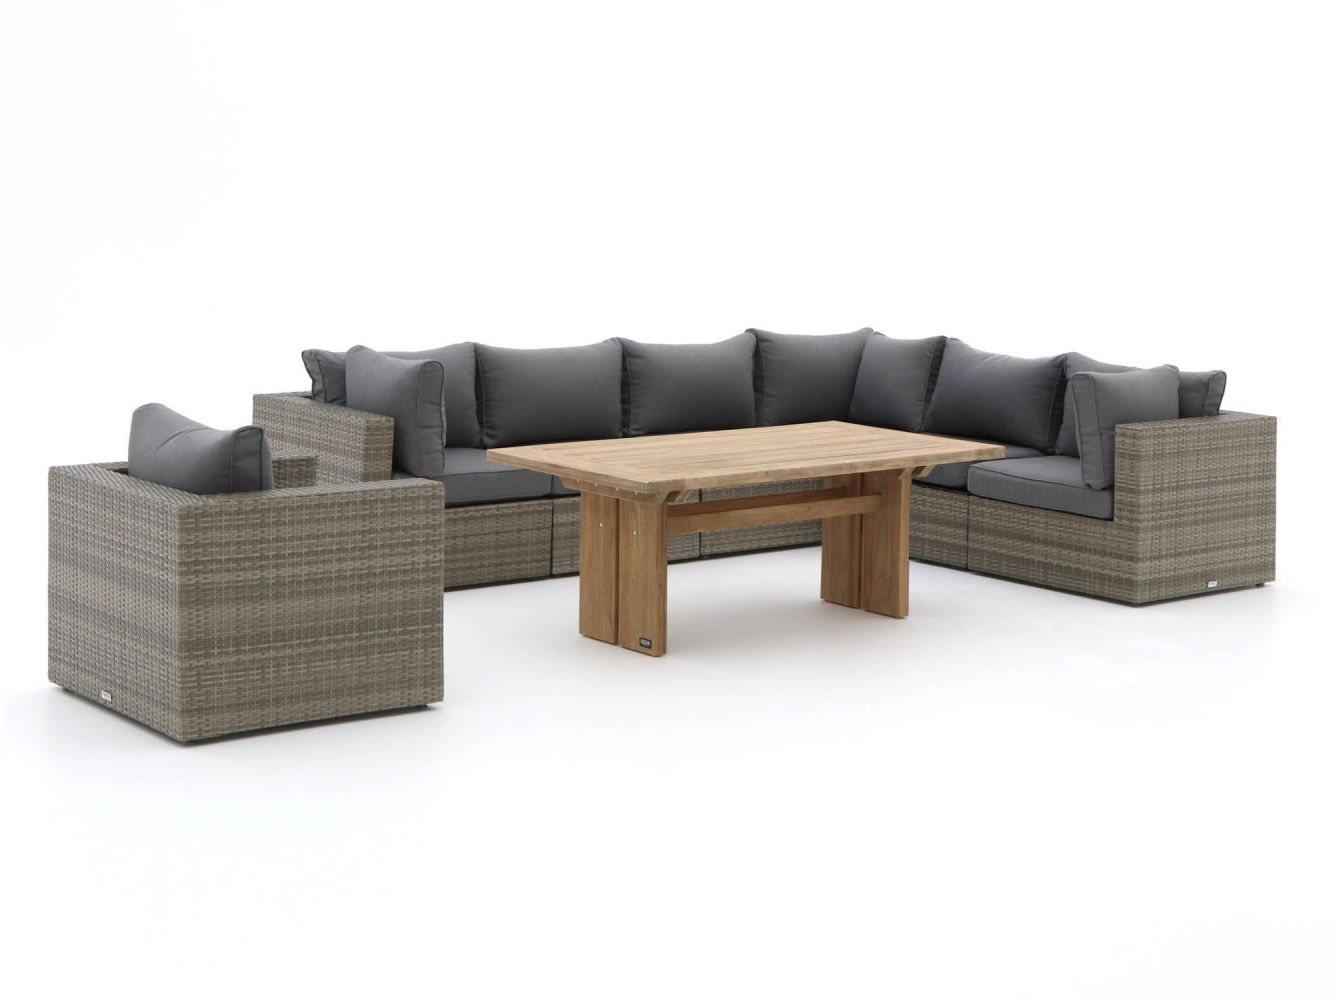 Wardianzaak uitbarsting reservoir Forza Barolo/ROUGH-L dining loungeset 8-delig - Ash Grey (incl. kussens) -  Kees Smit